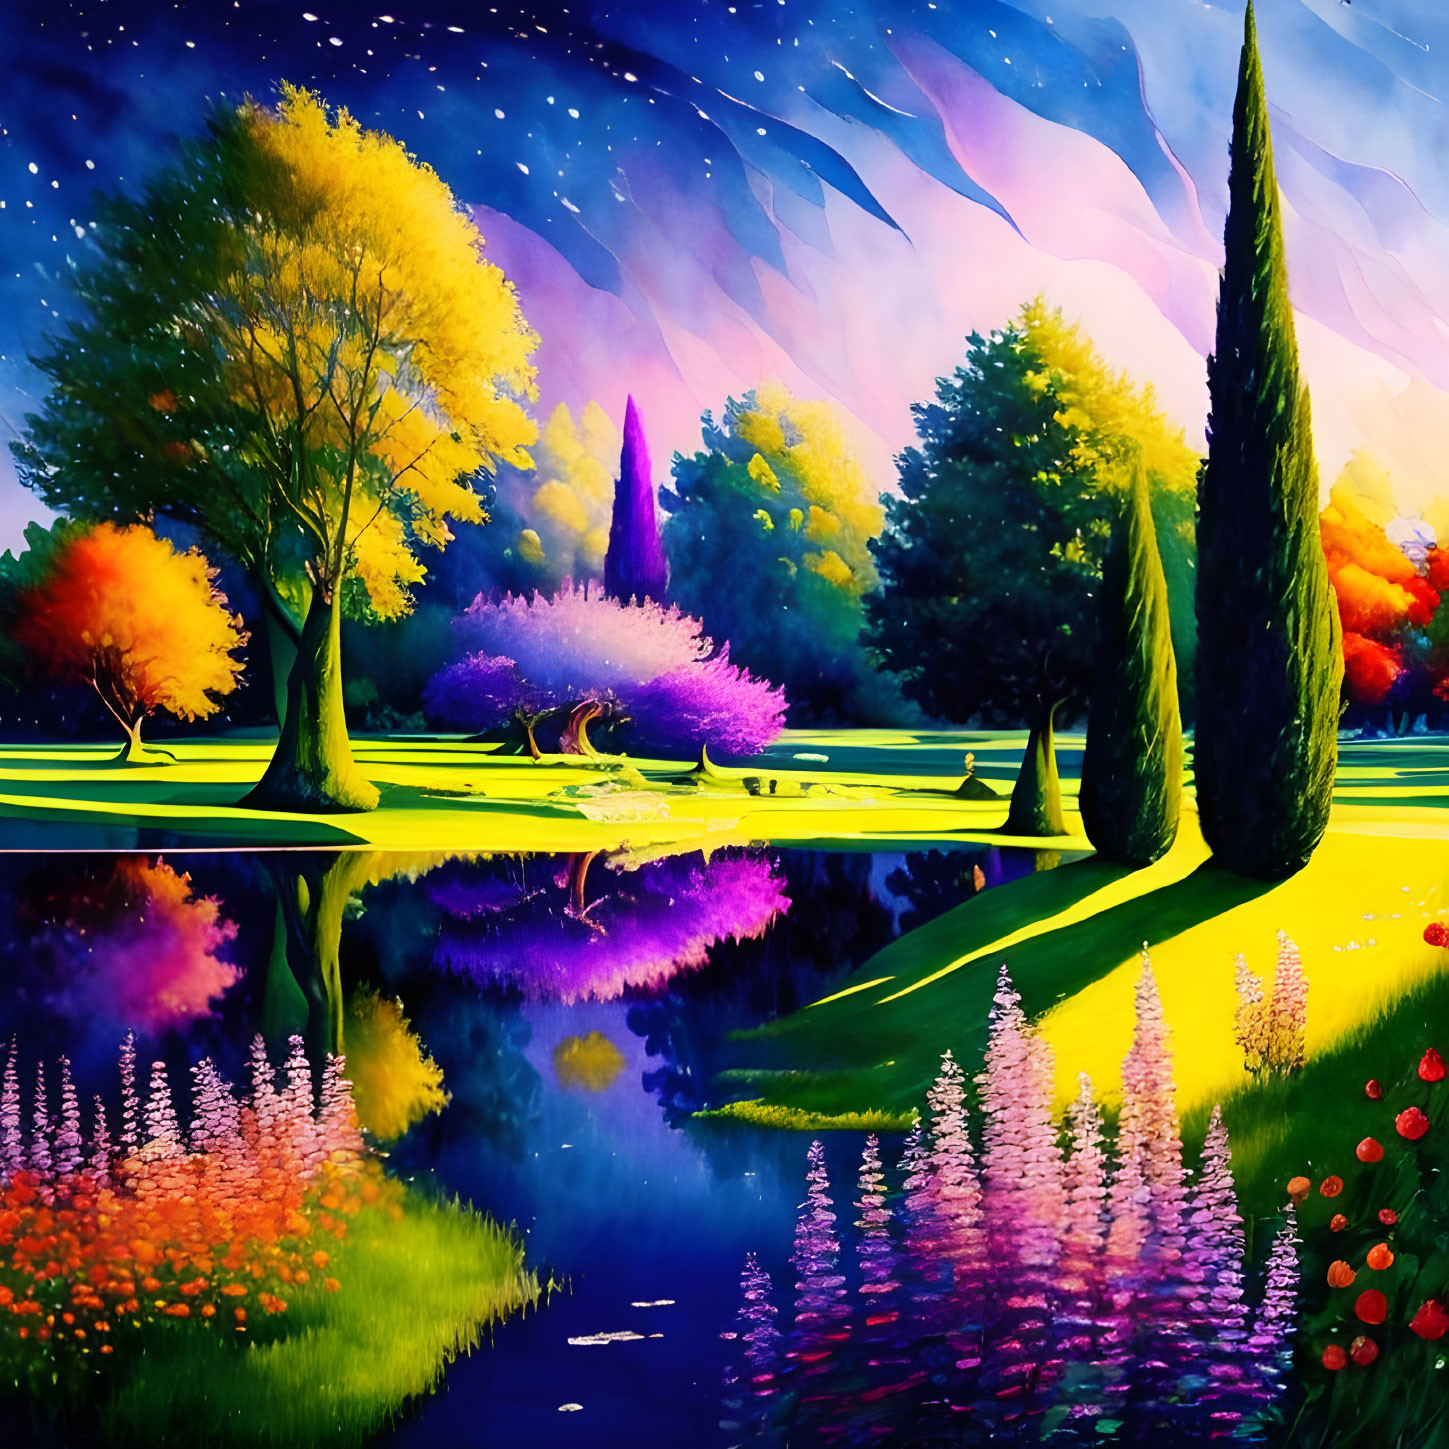 Colorful autumn landscape painting with trees and lake under blue sky